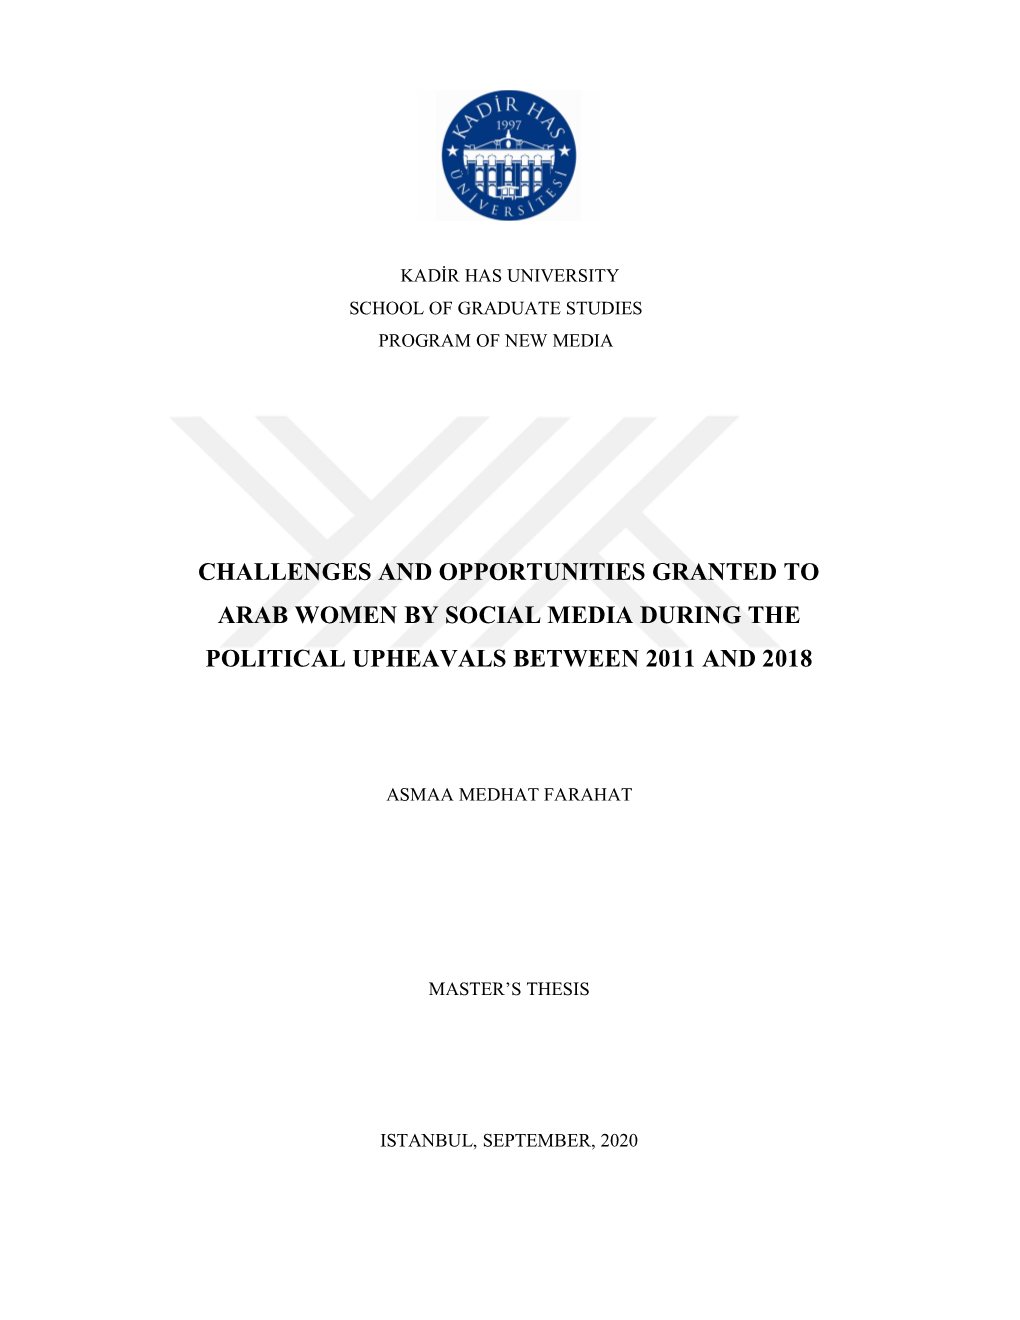 Challenges and Opportunities Granted to Arab Women by Social Media During the Political Upheavals Between 2011 and 2018